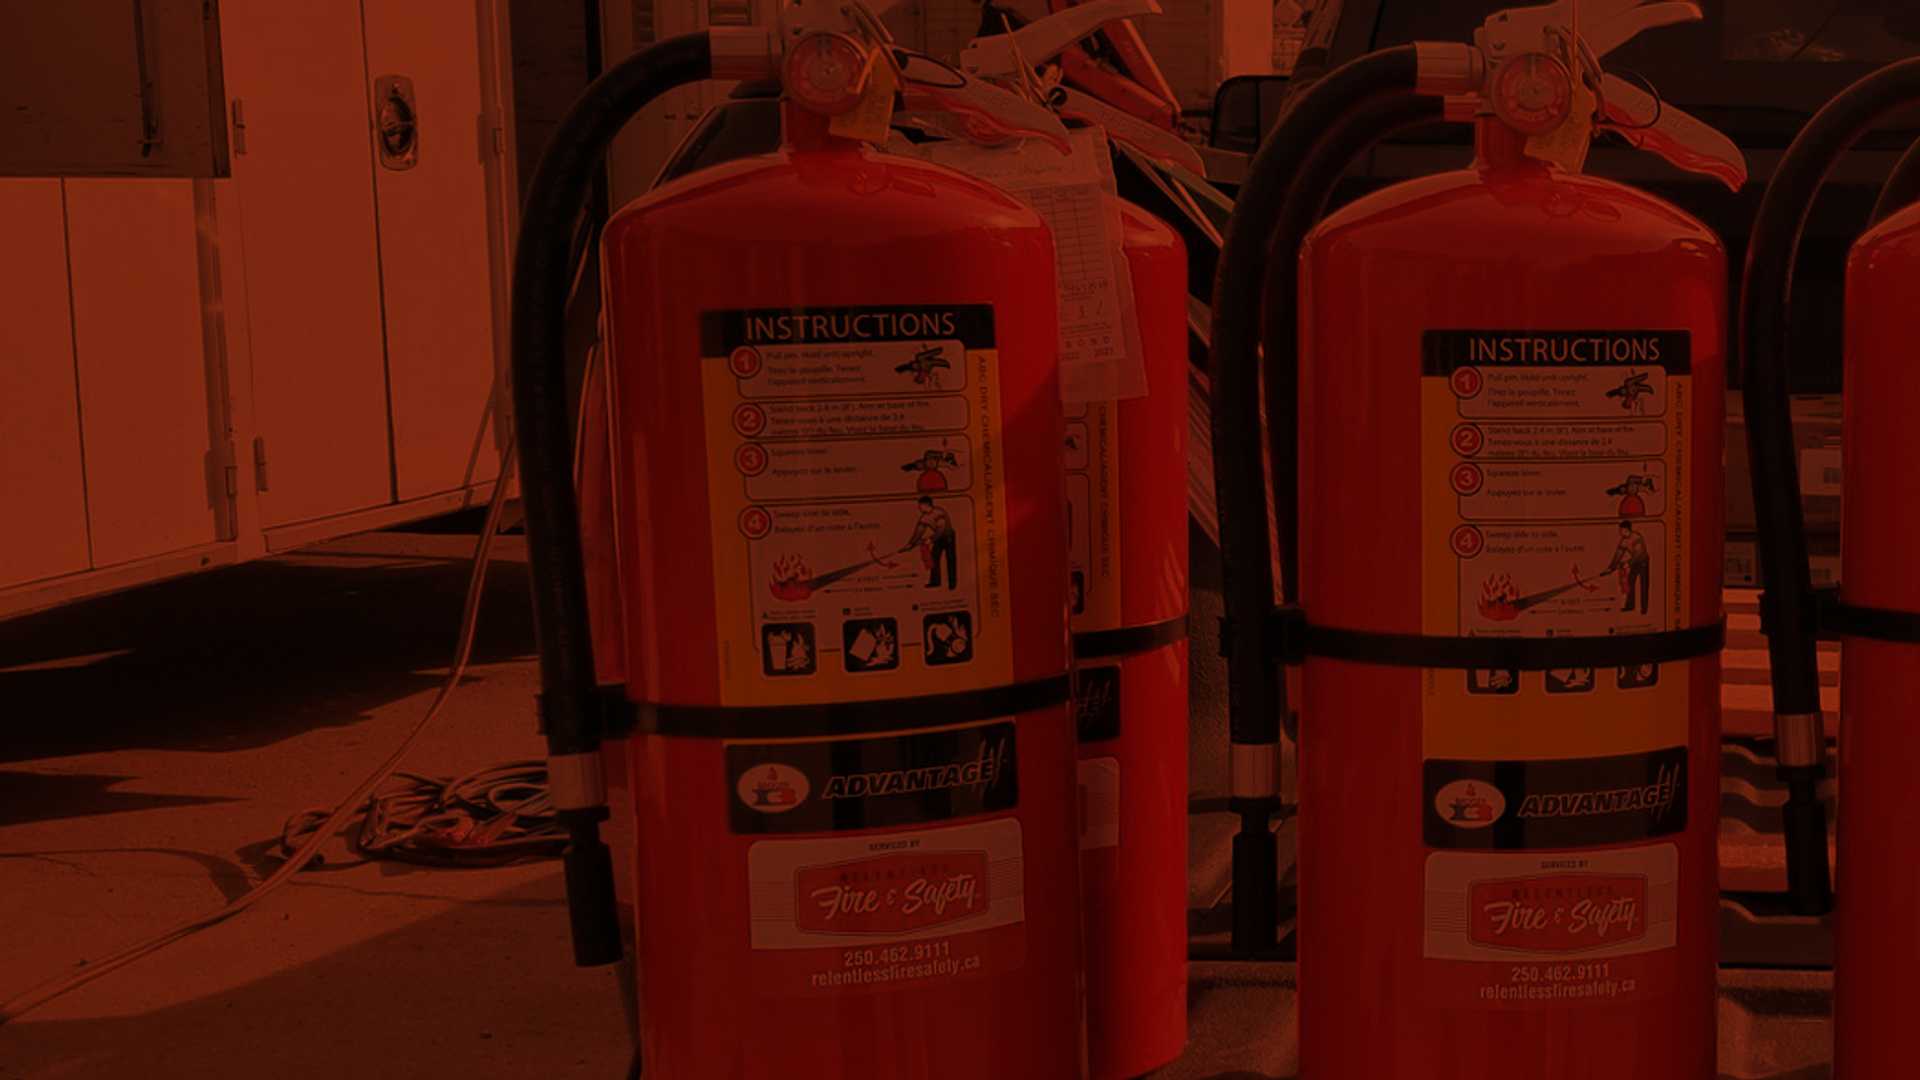 fire extinguisher inspections placeholder